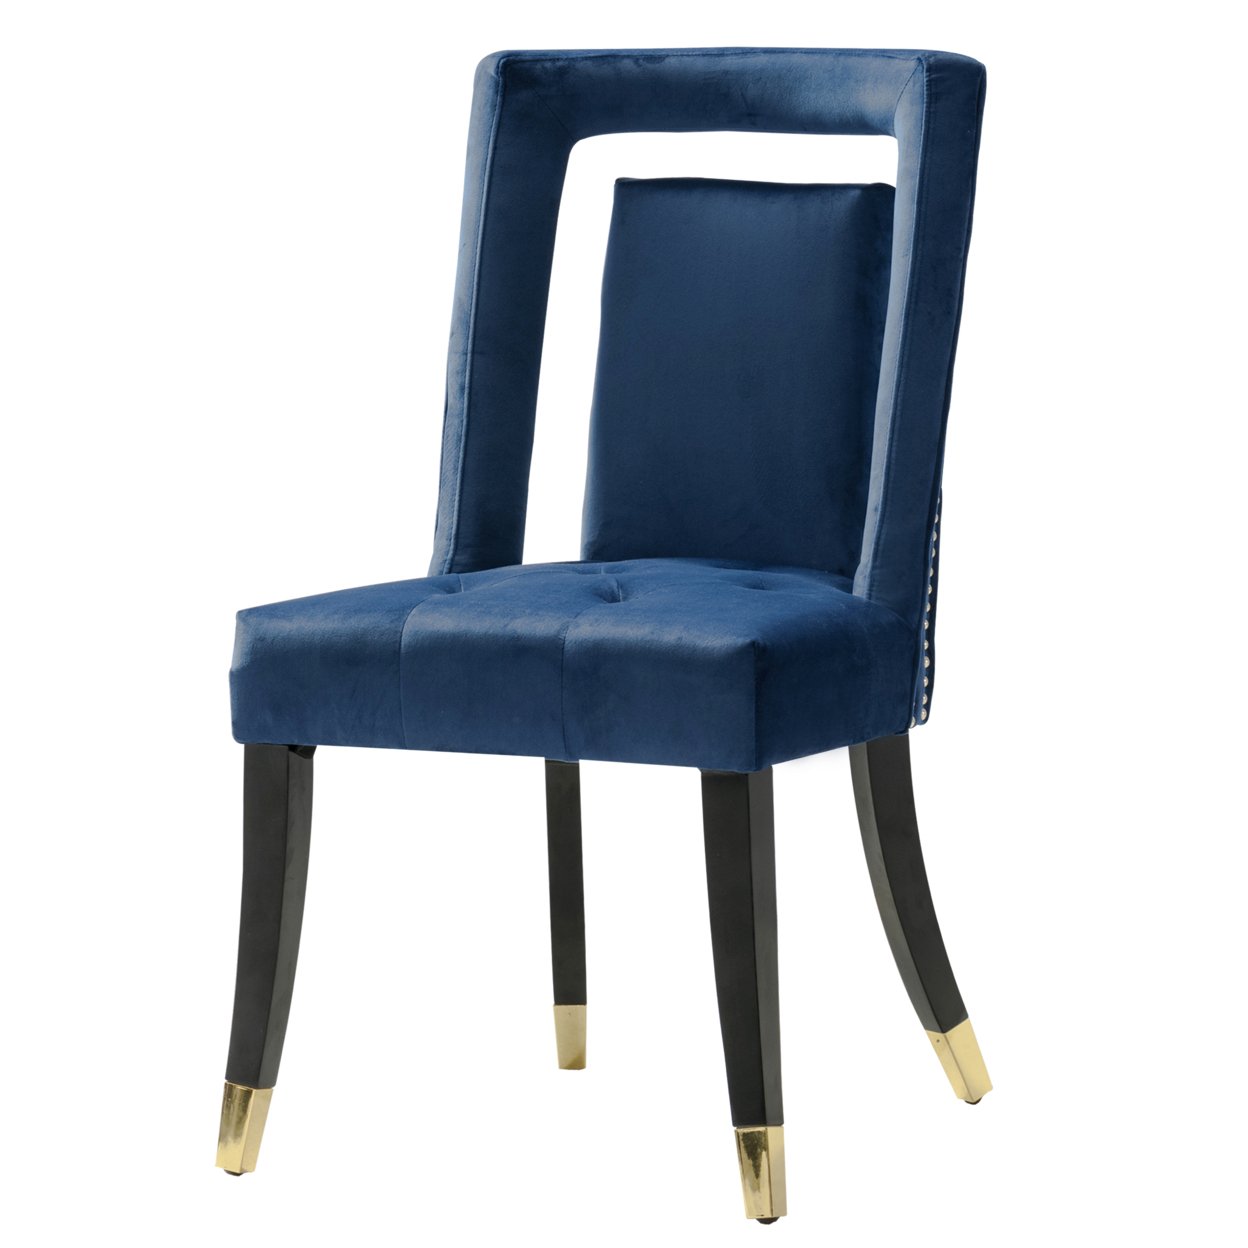 Iconic Home Elsa Dining Side Chair Velvet Upholstered Nailhead Trim Seat Espresso Finished Gold Tip Tapered Wood Legs, Set Of 2 - Navy